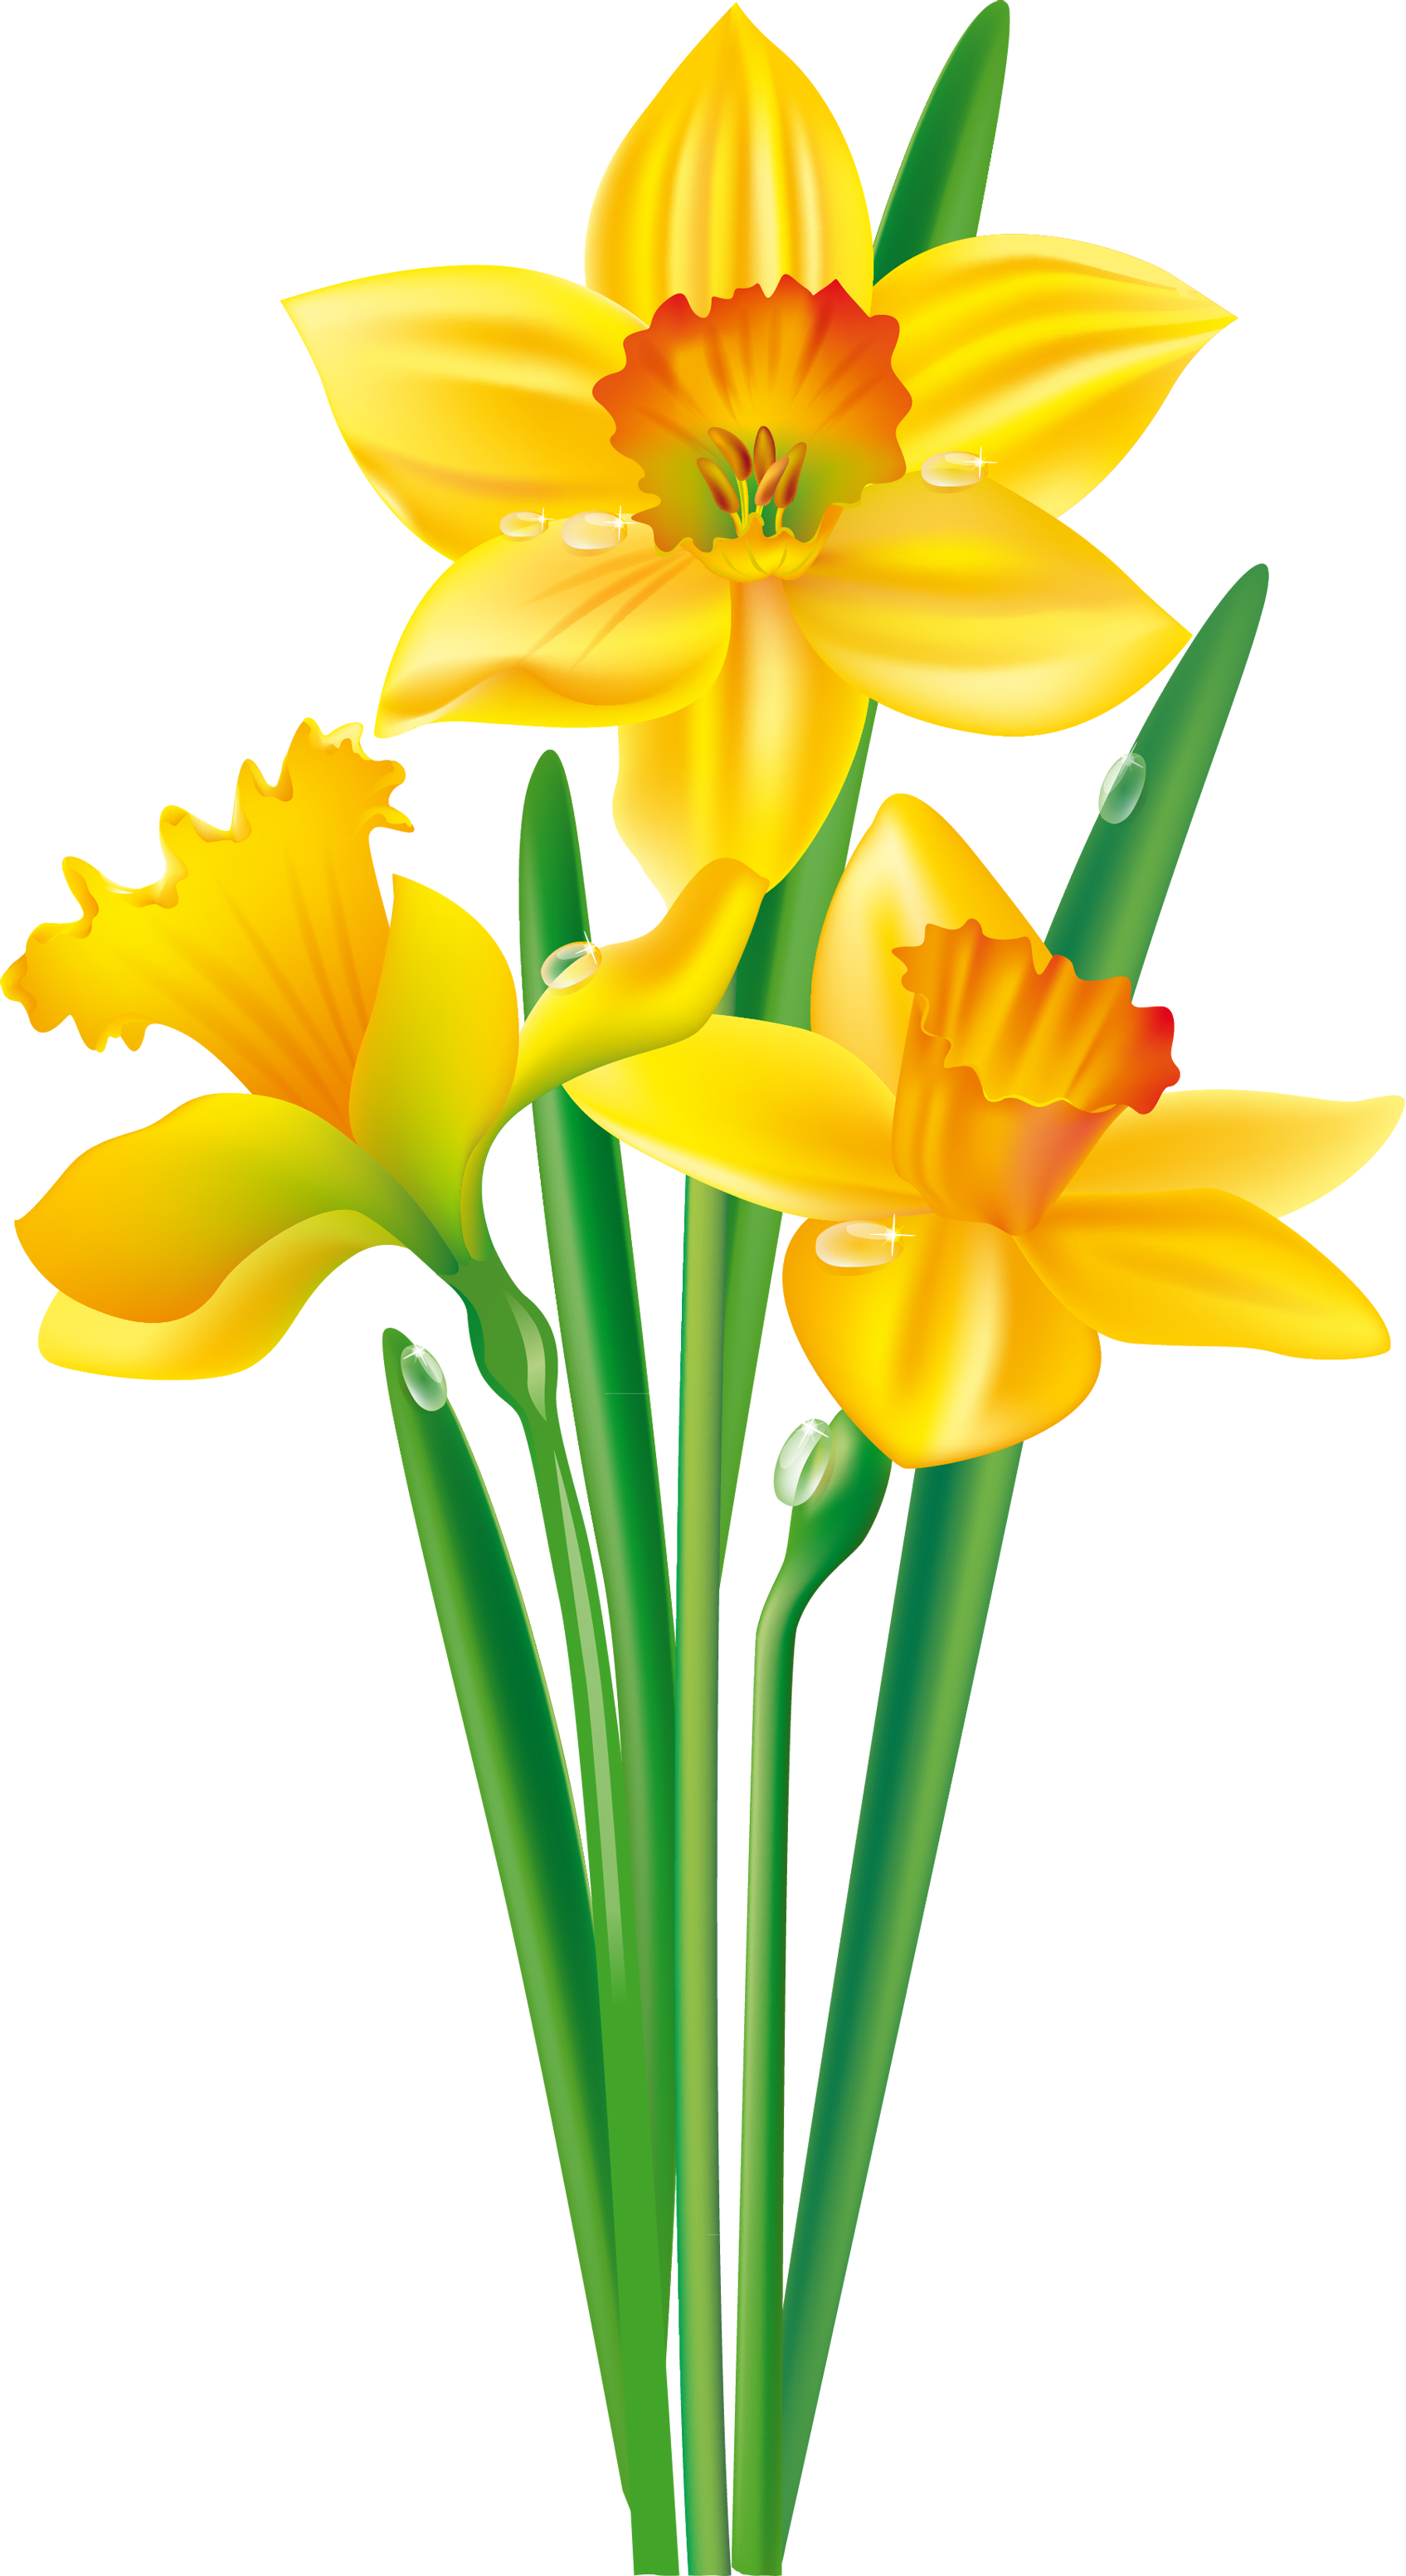 Daffodil clipart bulb, Daffodil bulb Transparent FREE for download on